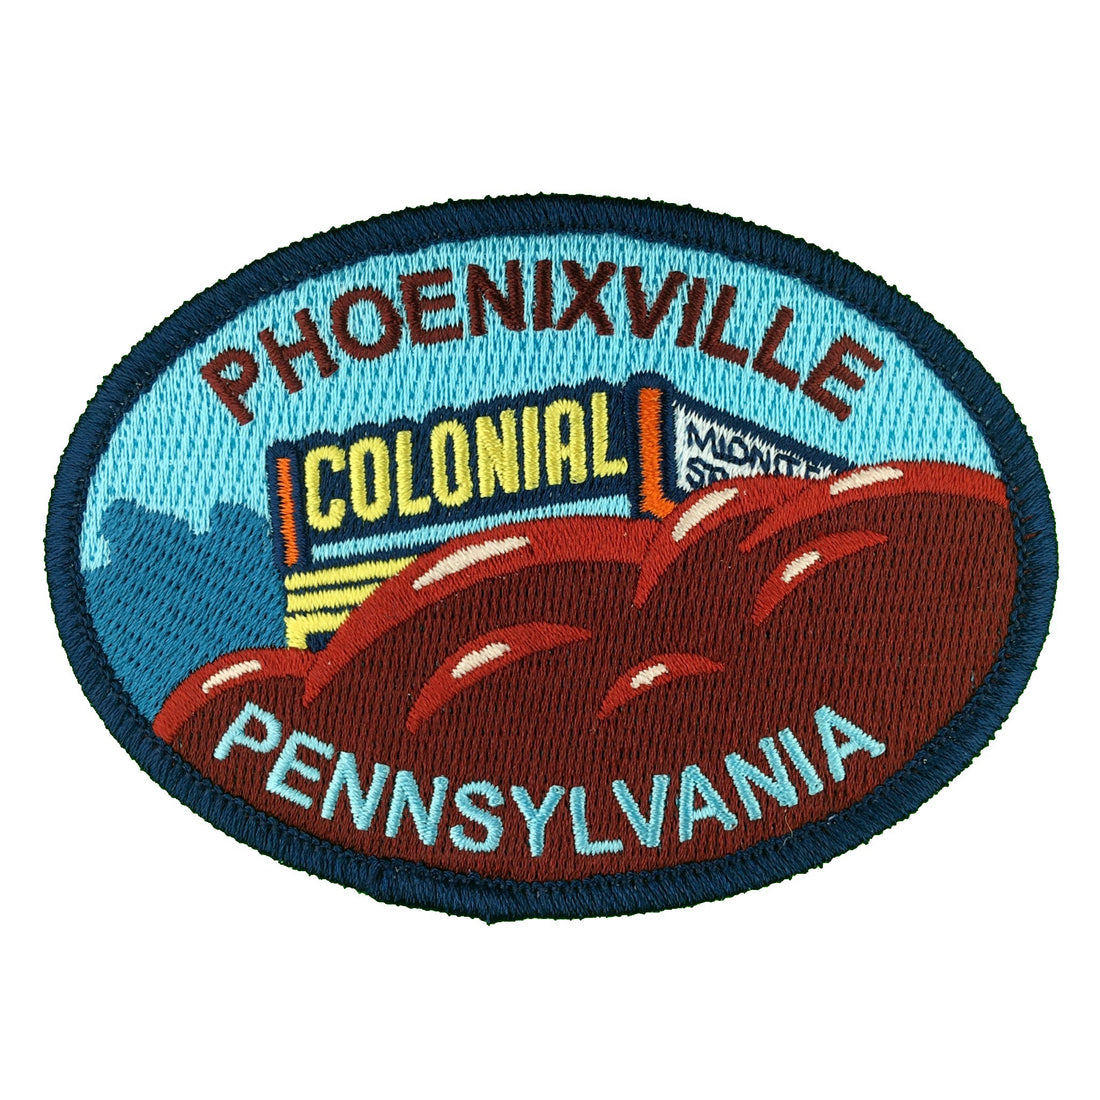 Phoenixville Pennsylvania The Blob Colonial Theater travel patch